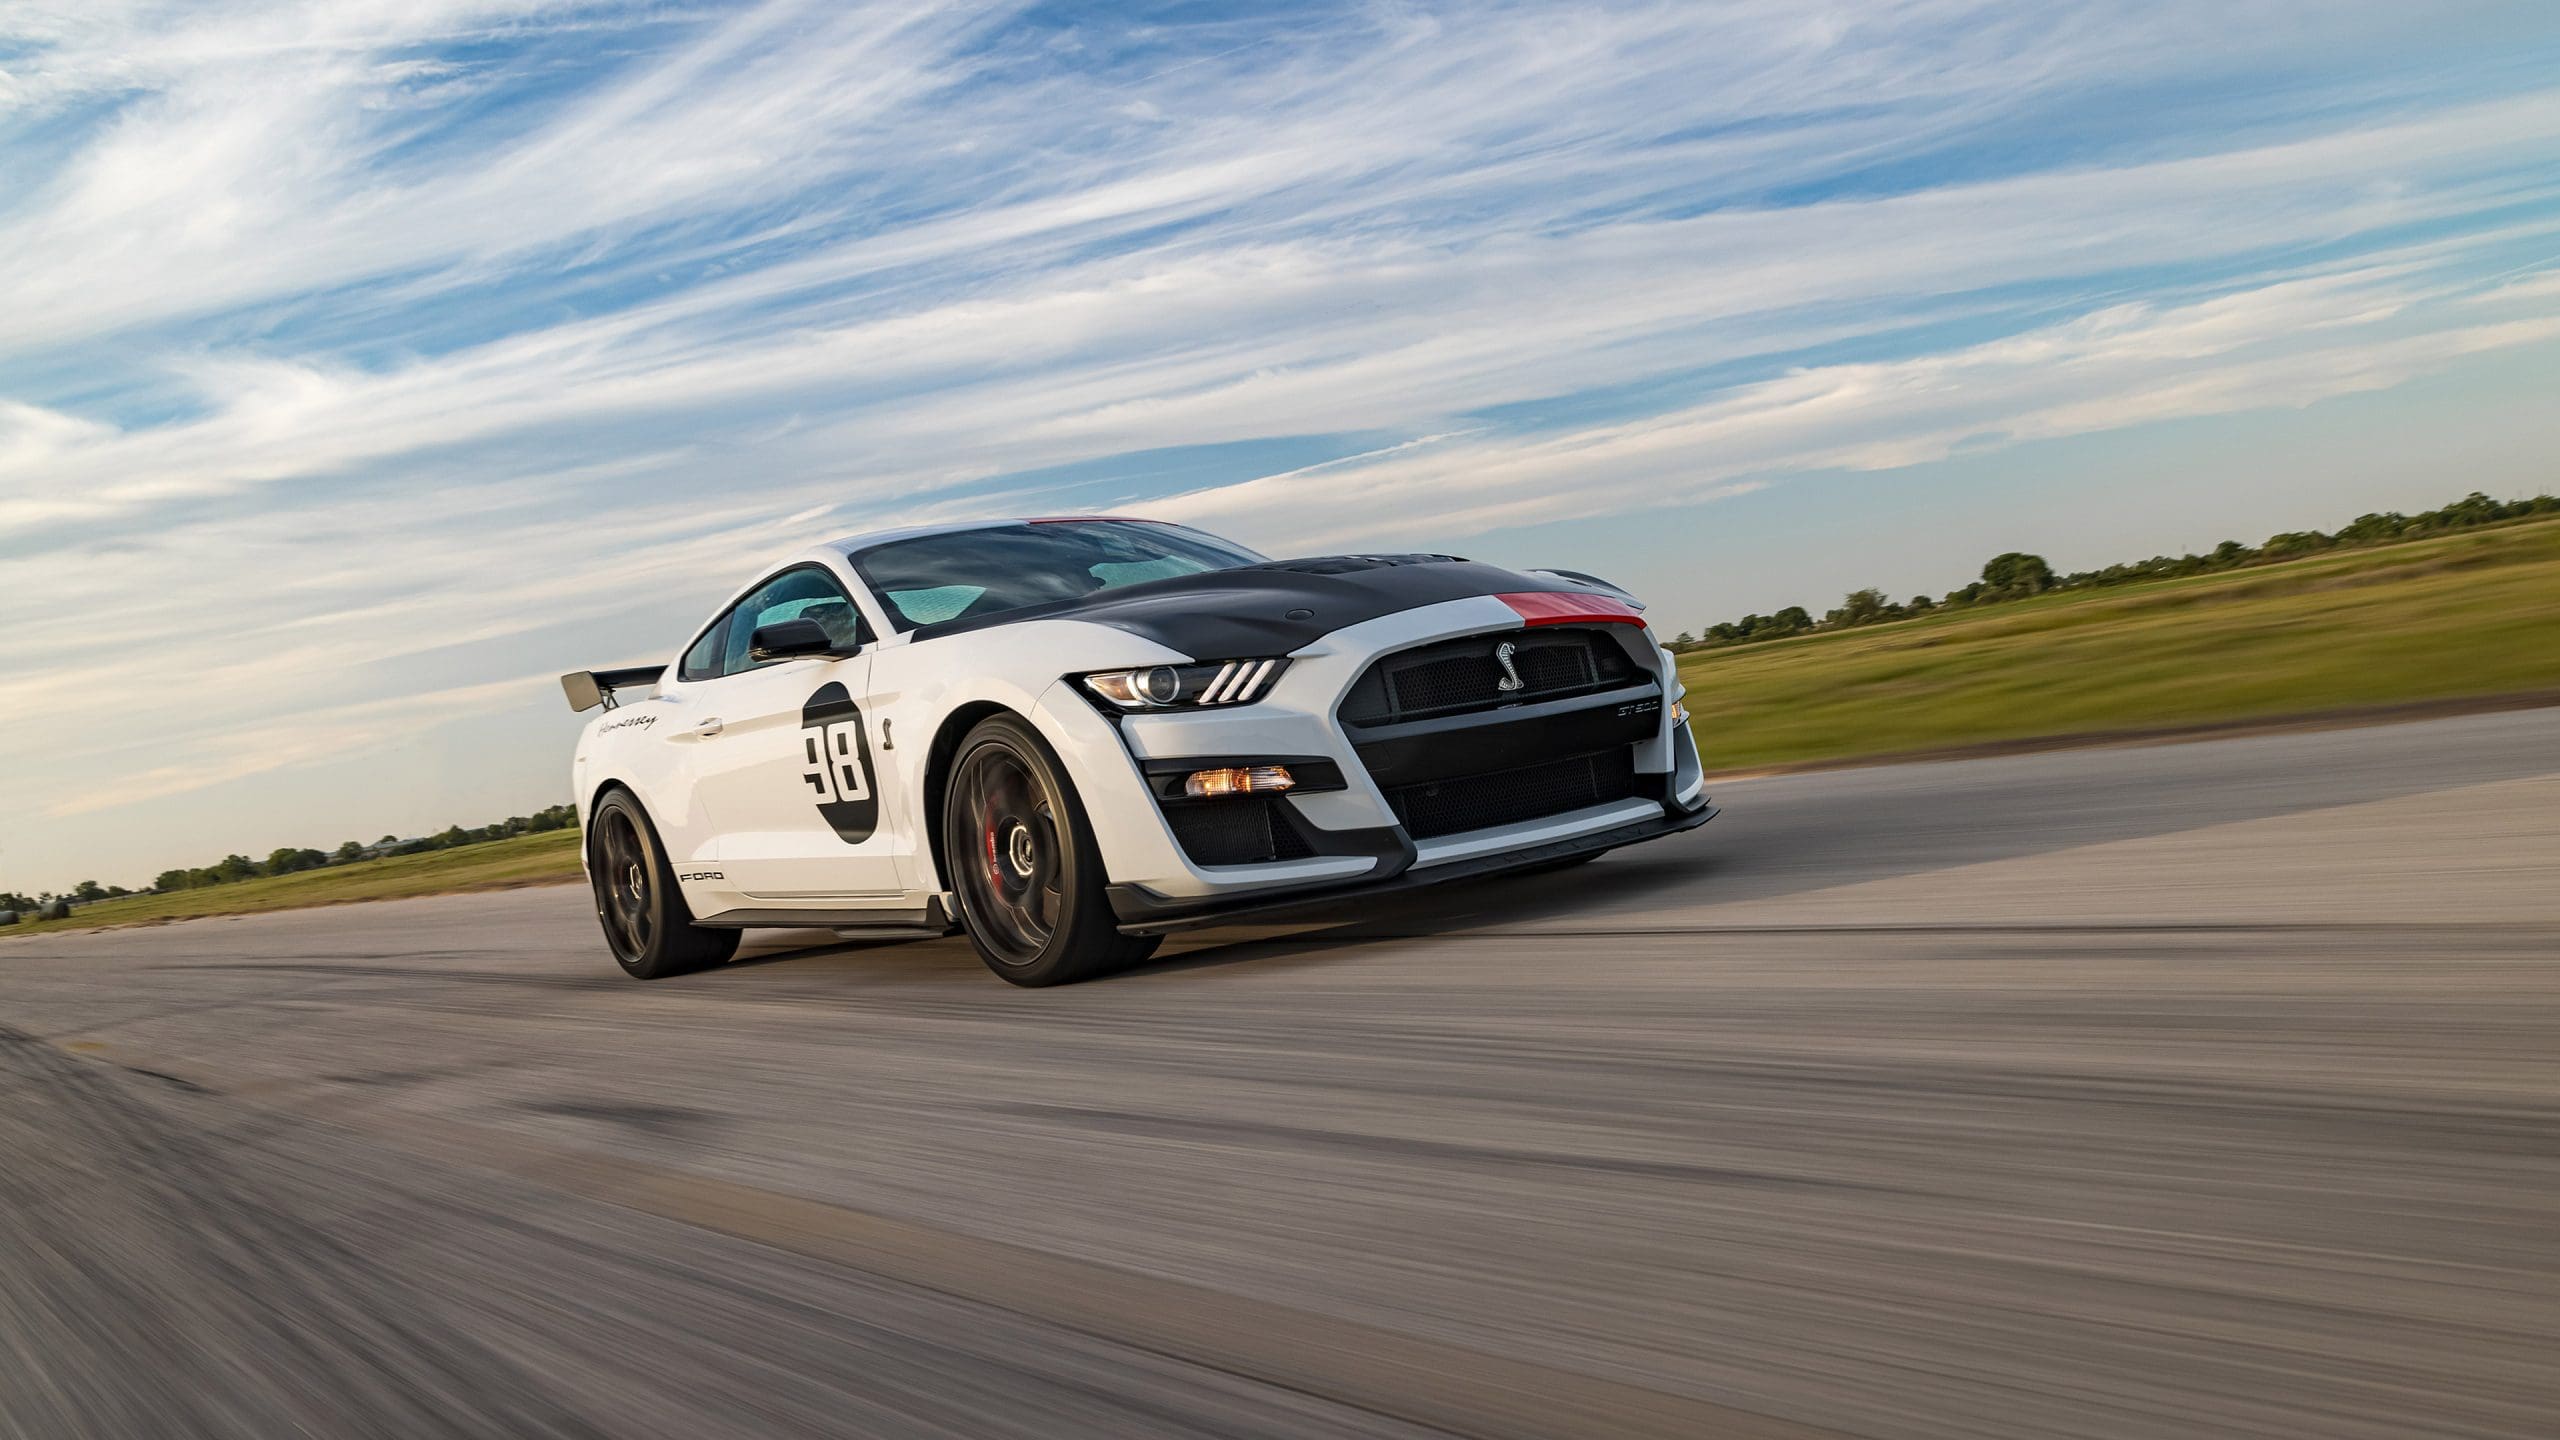 Mustang Of The Day: 2022 Hennessey Venom 1200 Mustang GT500